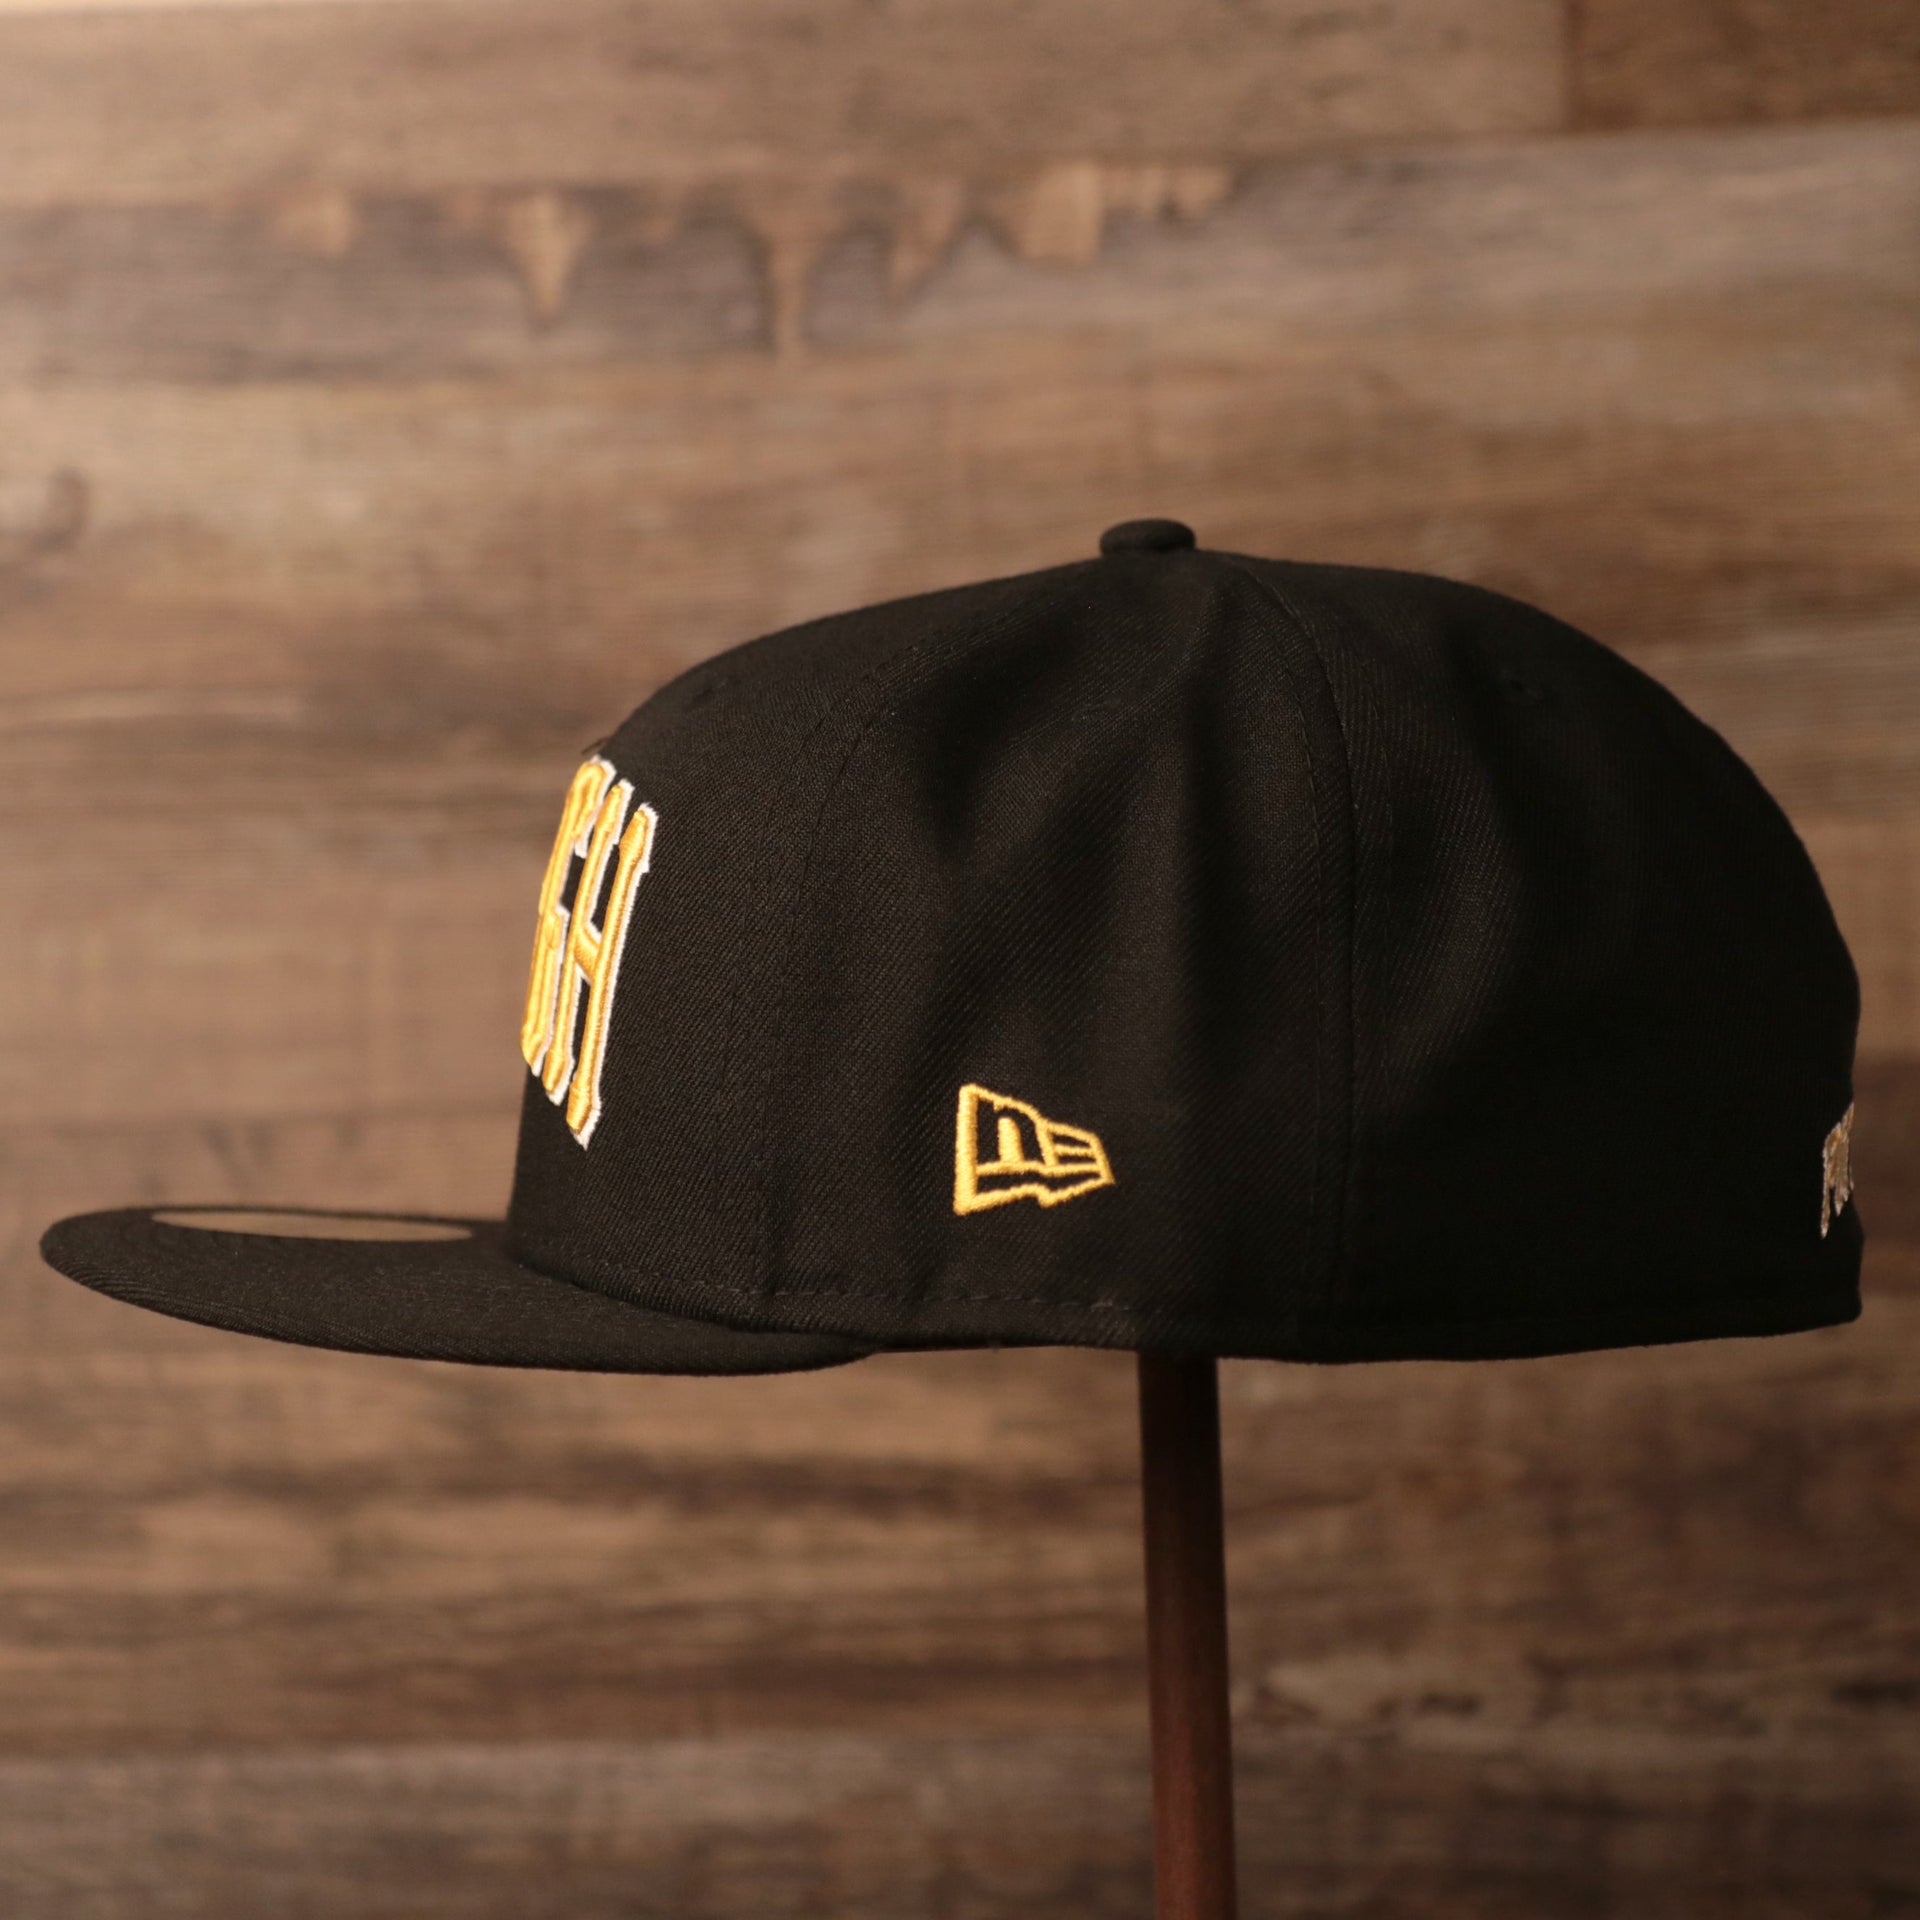 The right side of the black retro New Era fitted hat for the Pittsburgh Pirates.